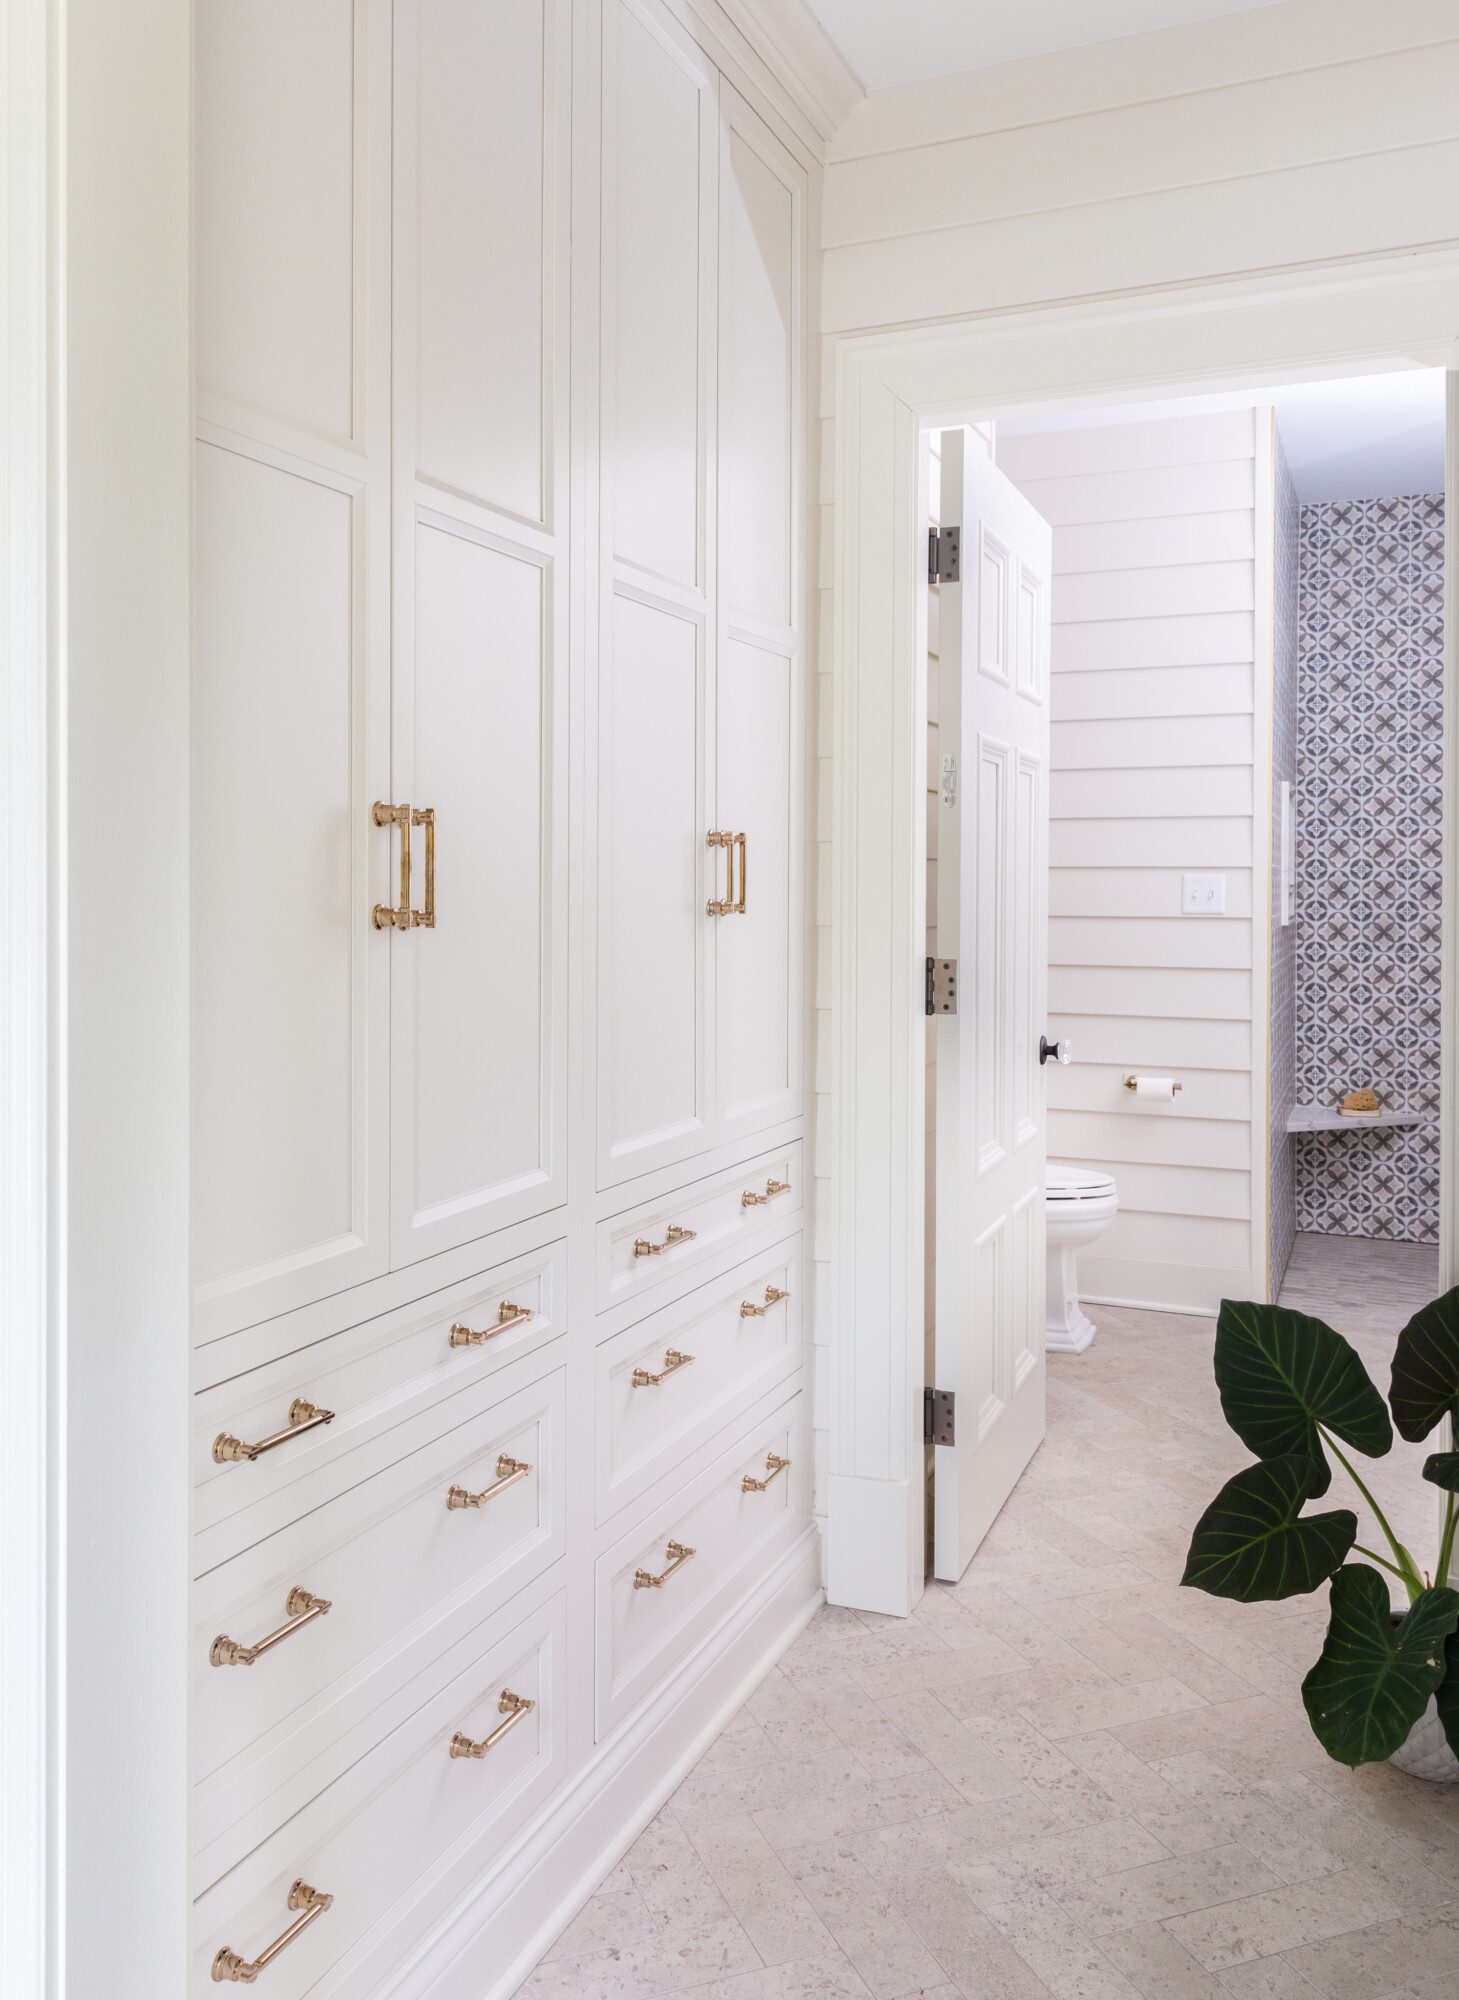 All white floor to ceiling storage closets and drawers with gold accents